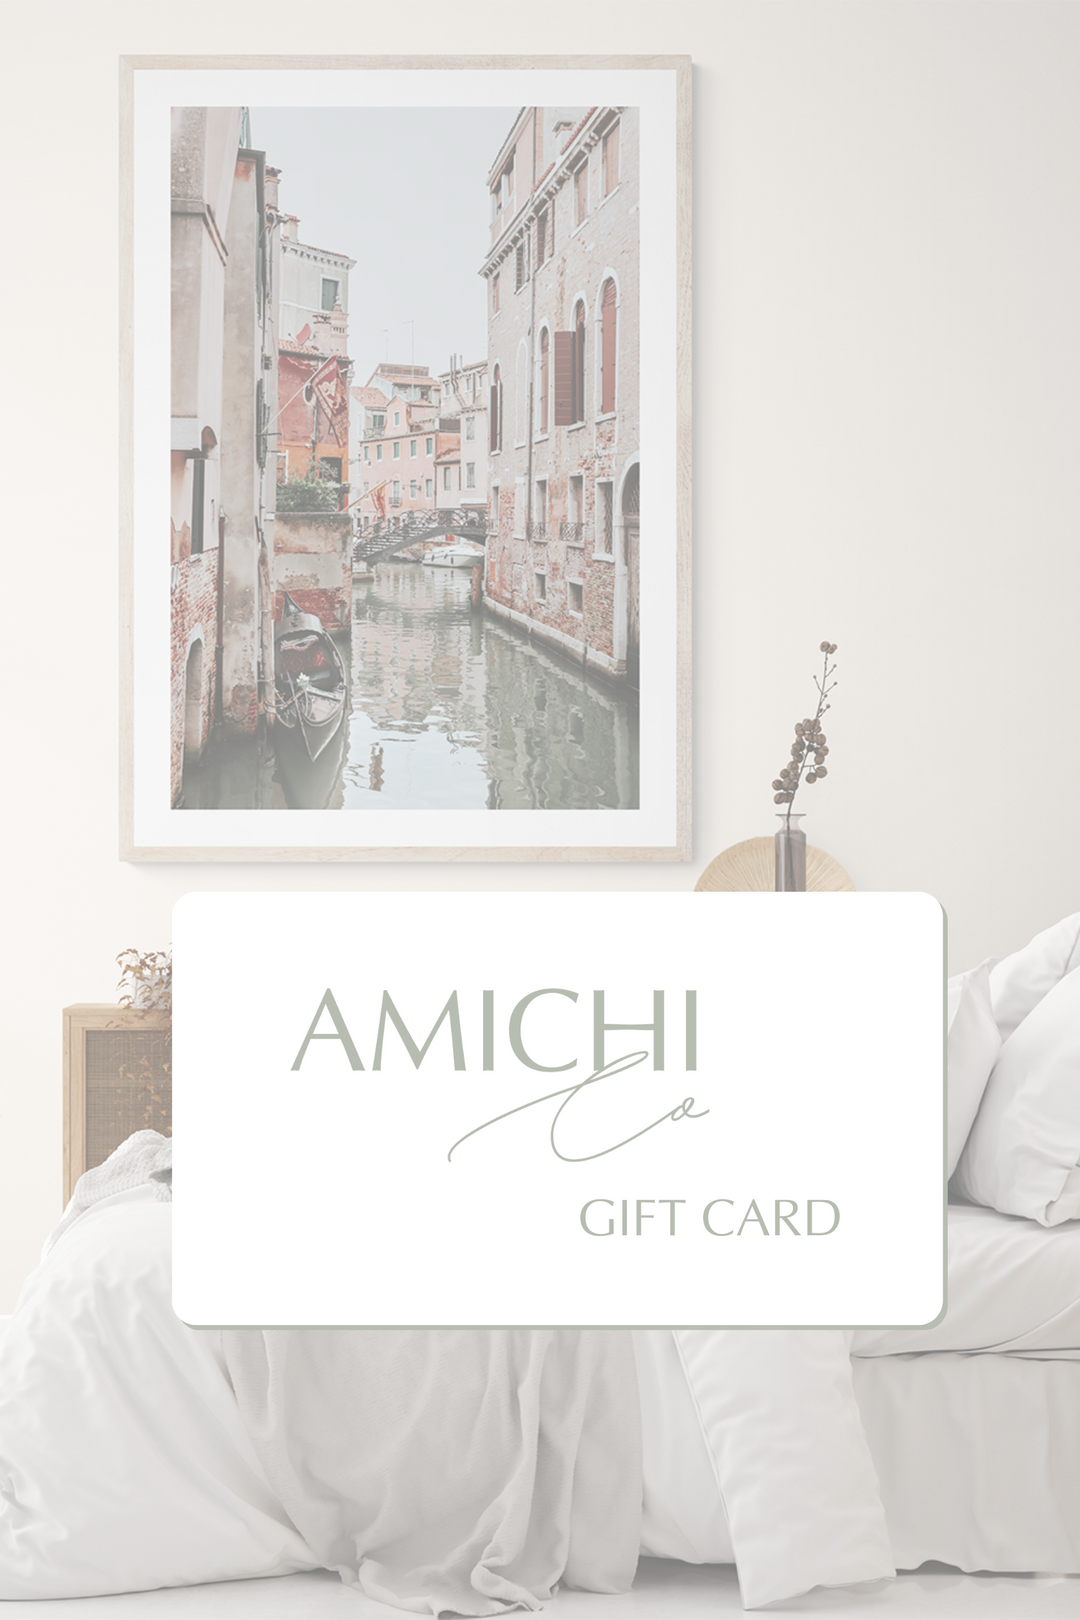 Gift Cards - Amichi Co